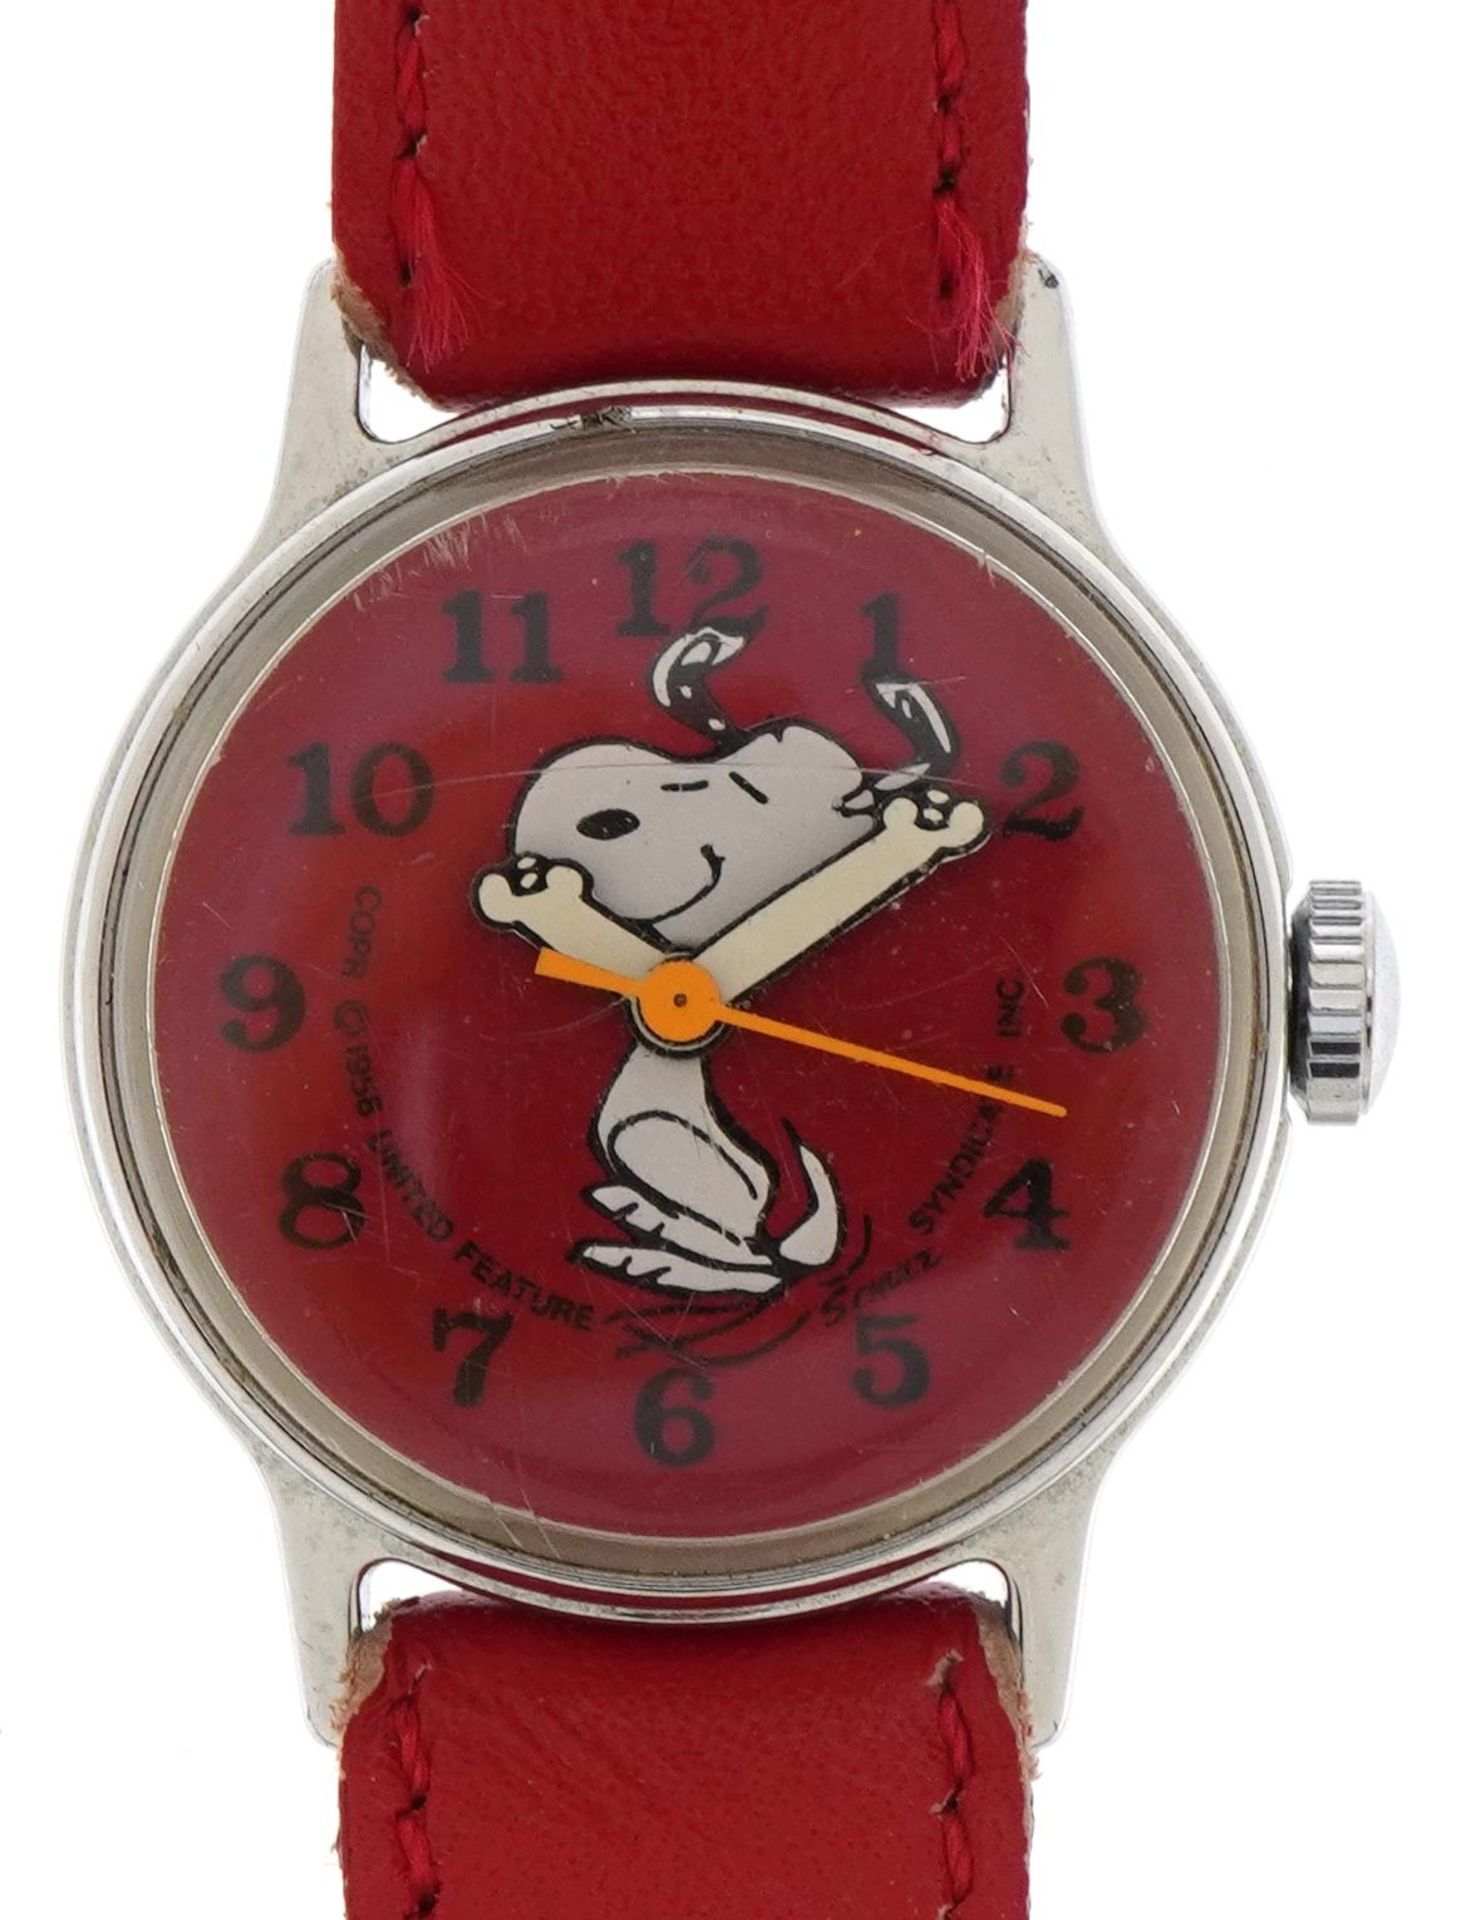 Vintage ladies Snoopy wristwatch with leather strap, the case 25mm in diameter